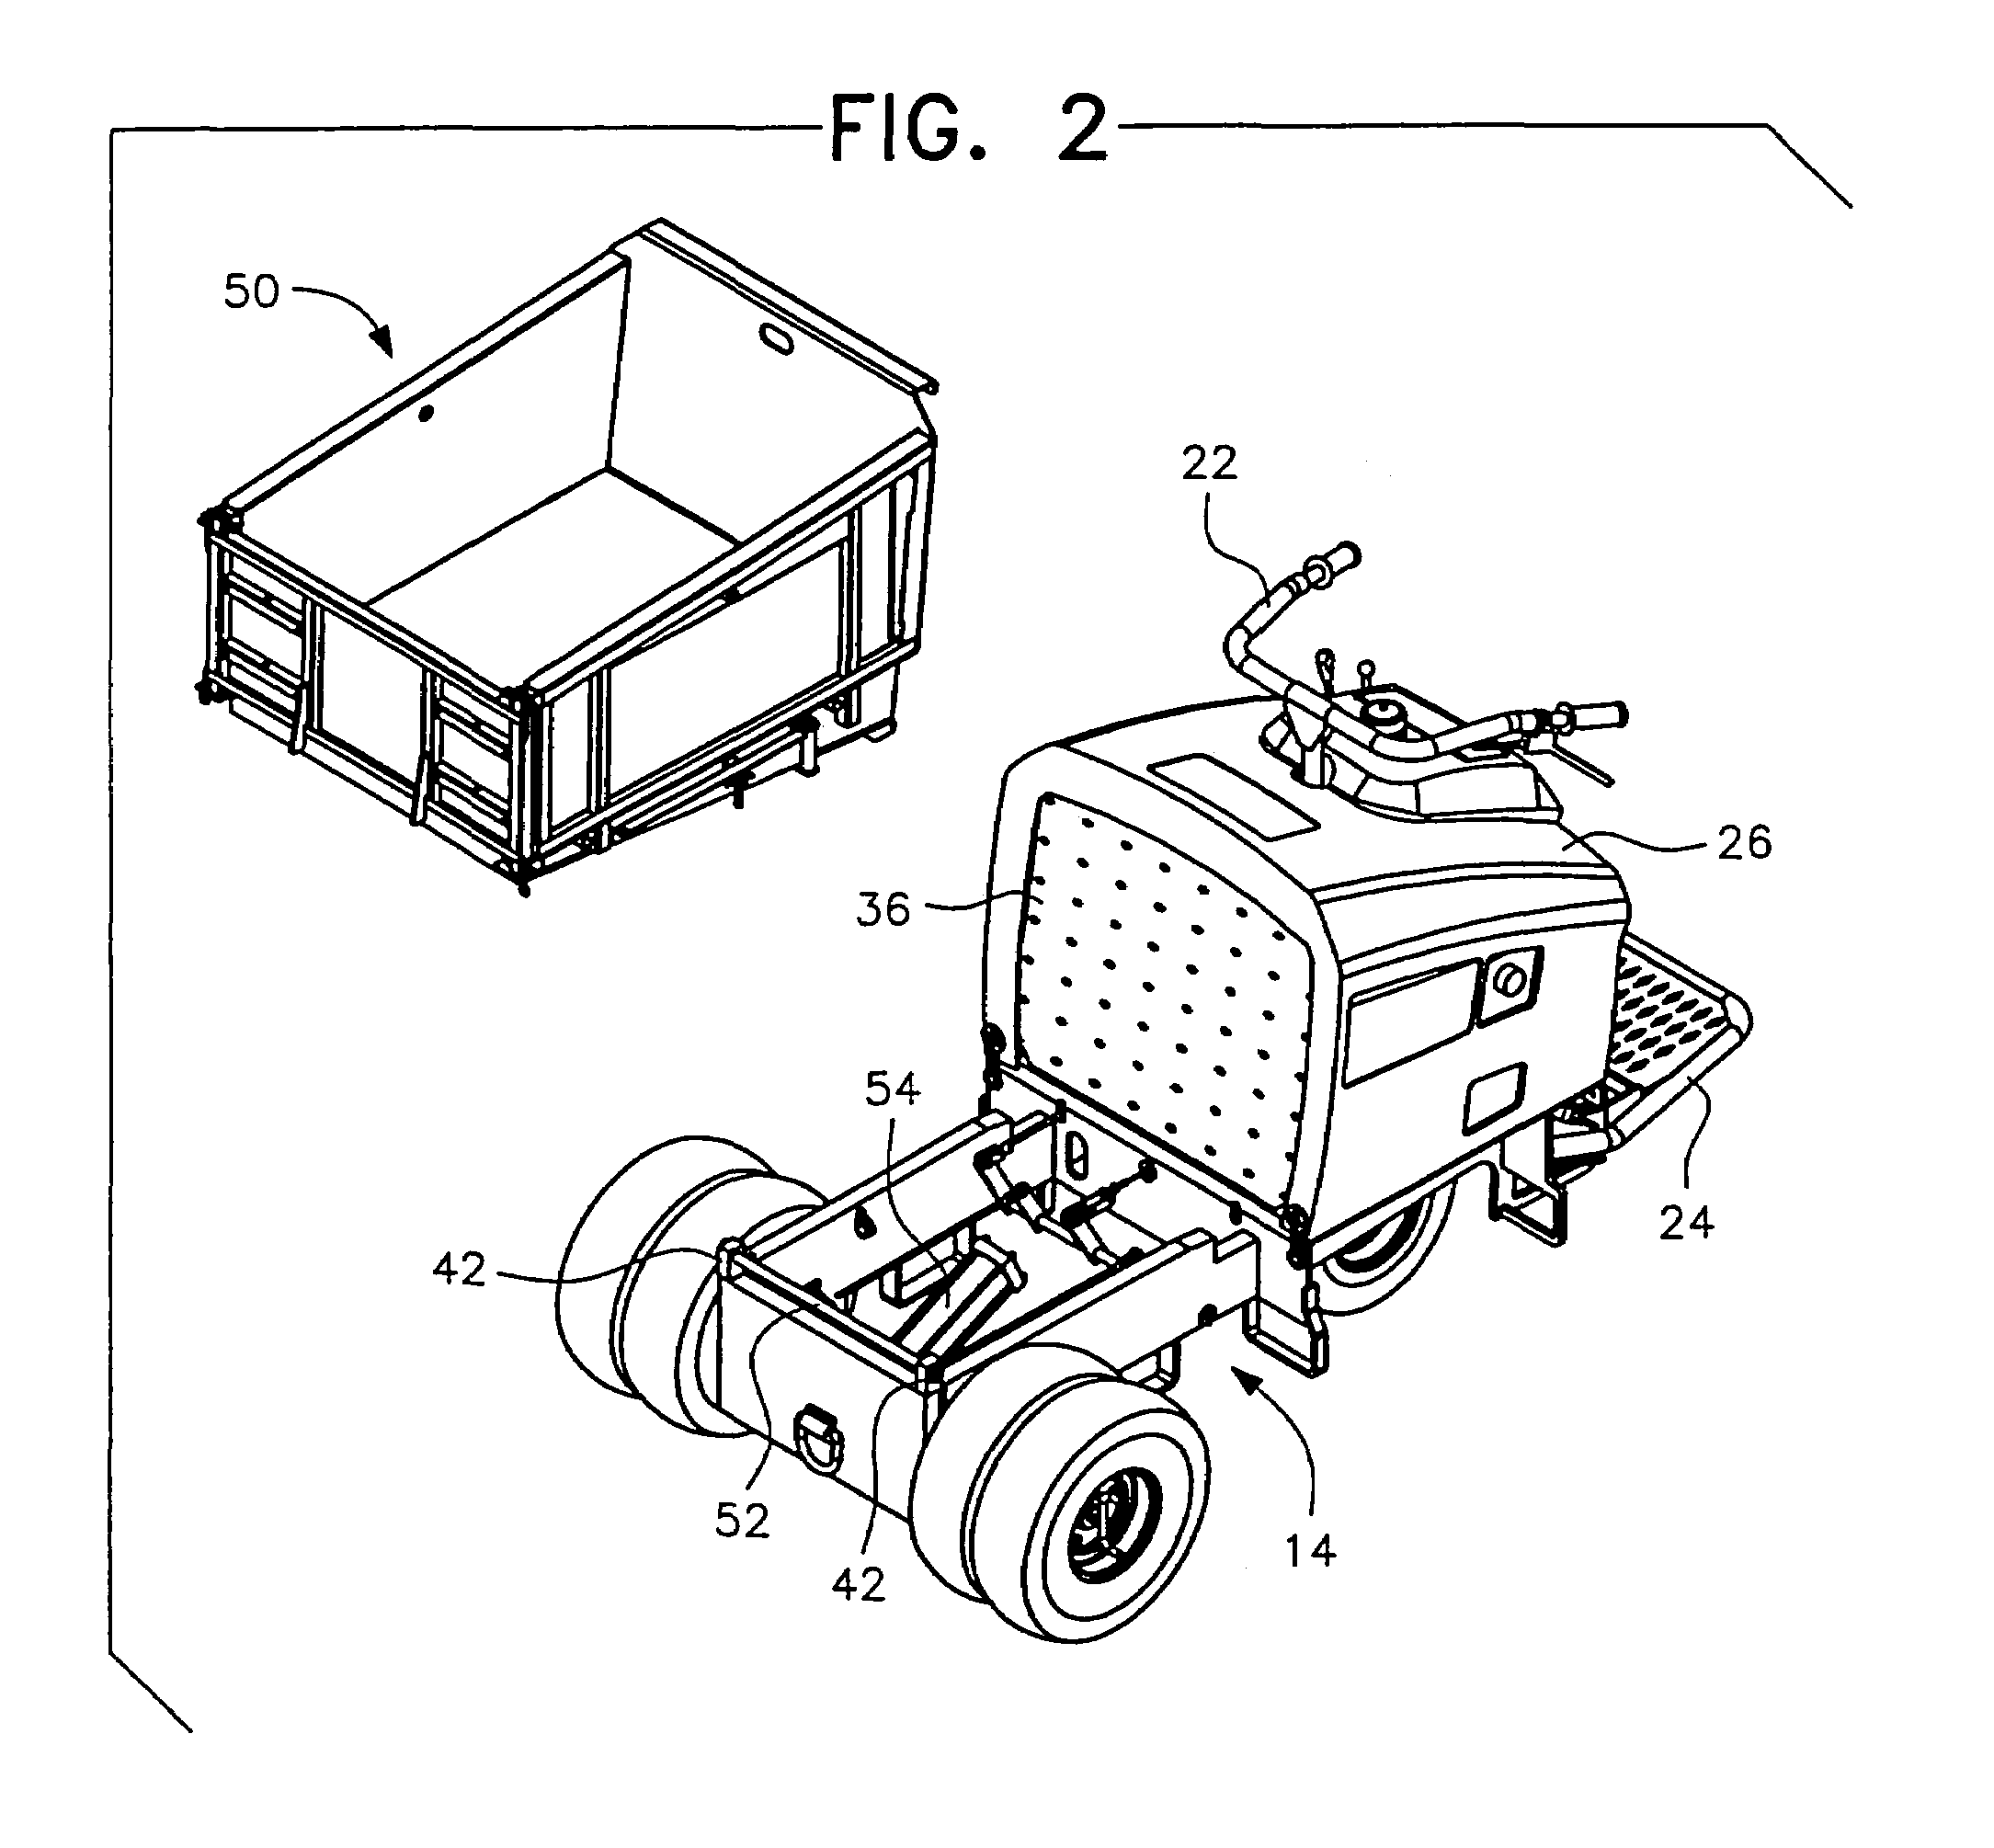 Mortar buggy with stake bed assembly